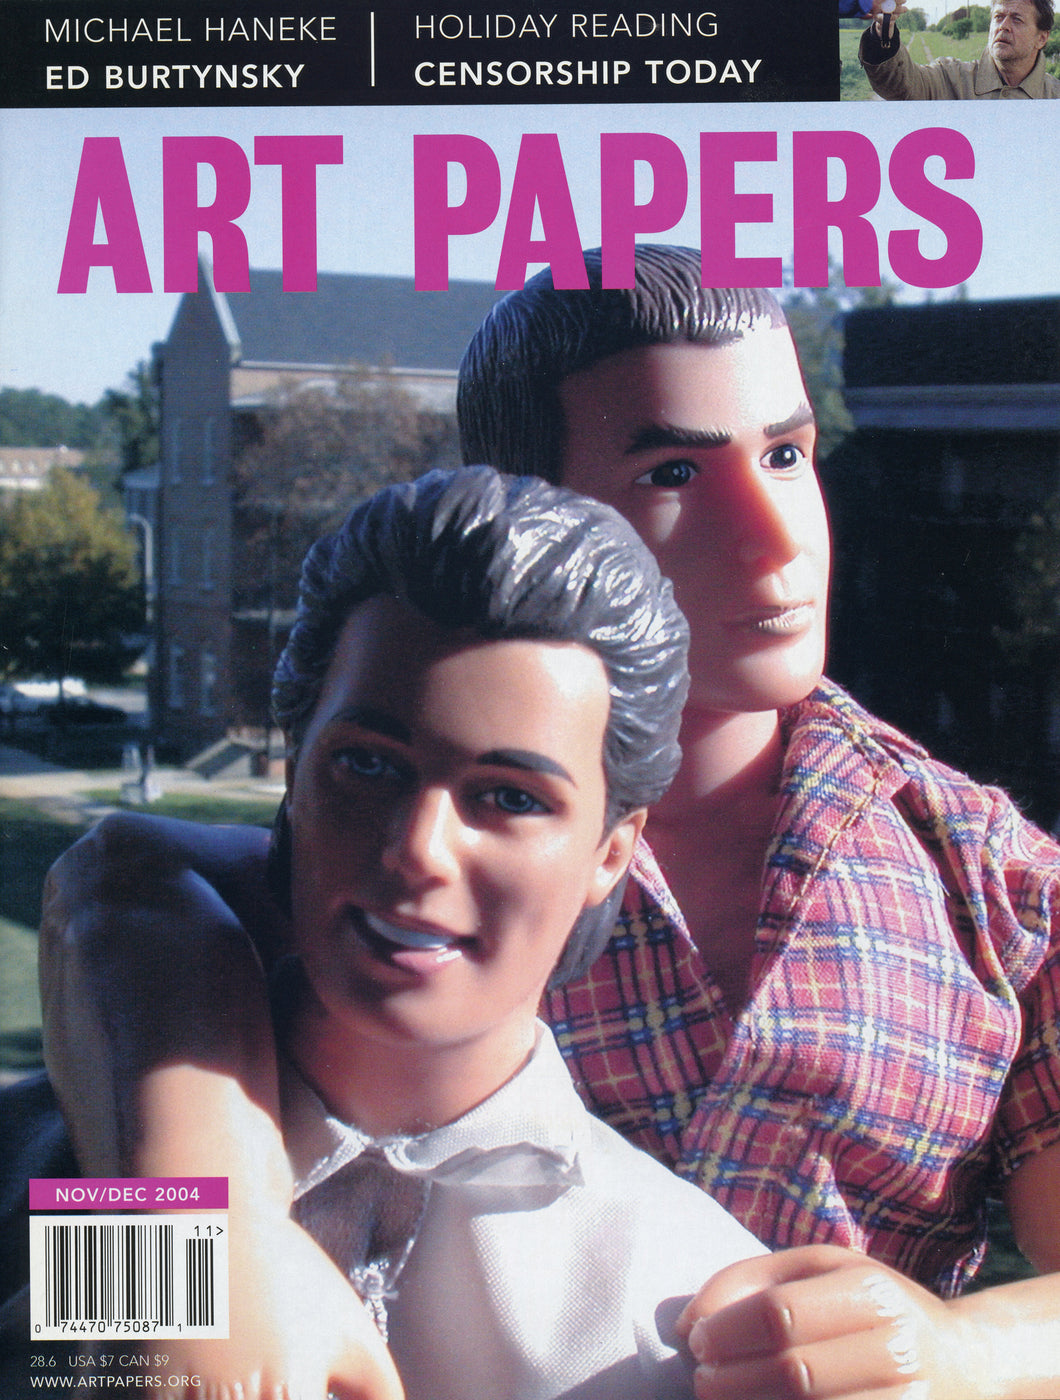 ART PAPERS 28.06 - Nov/Dec 2004 - SOLD OUT